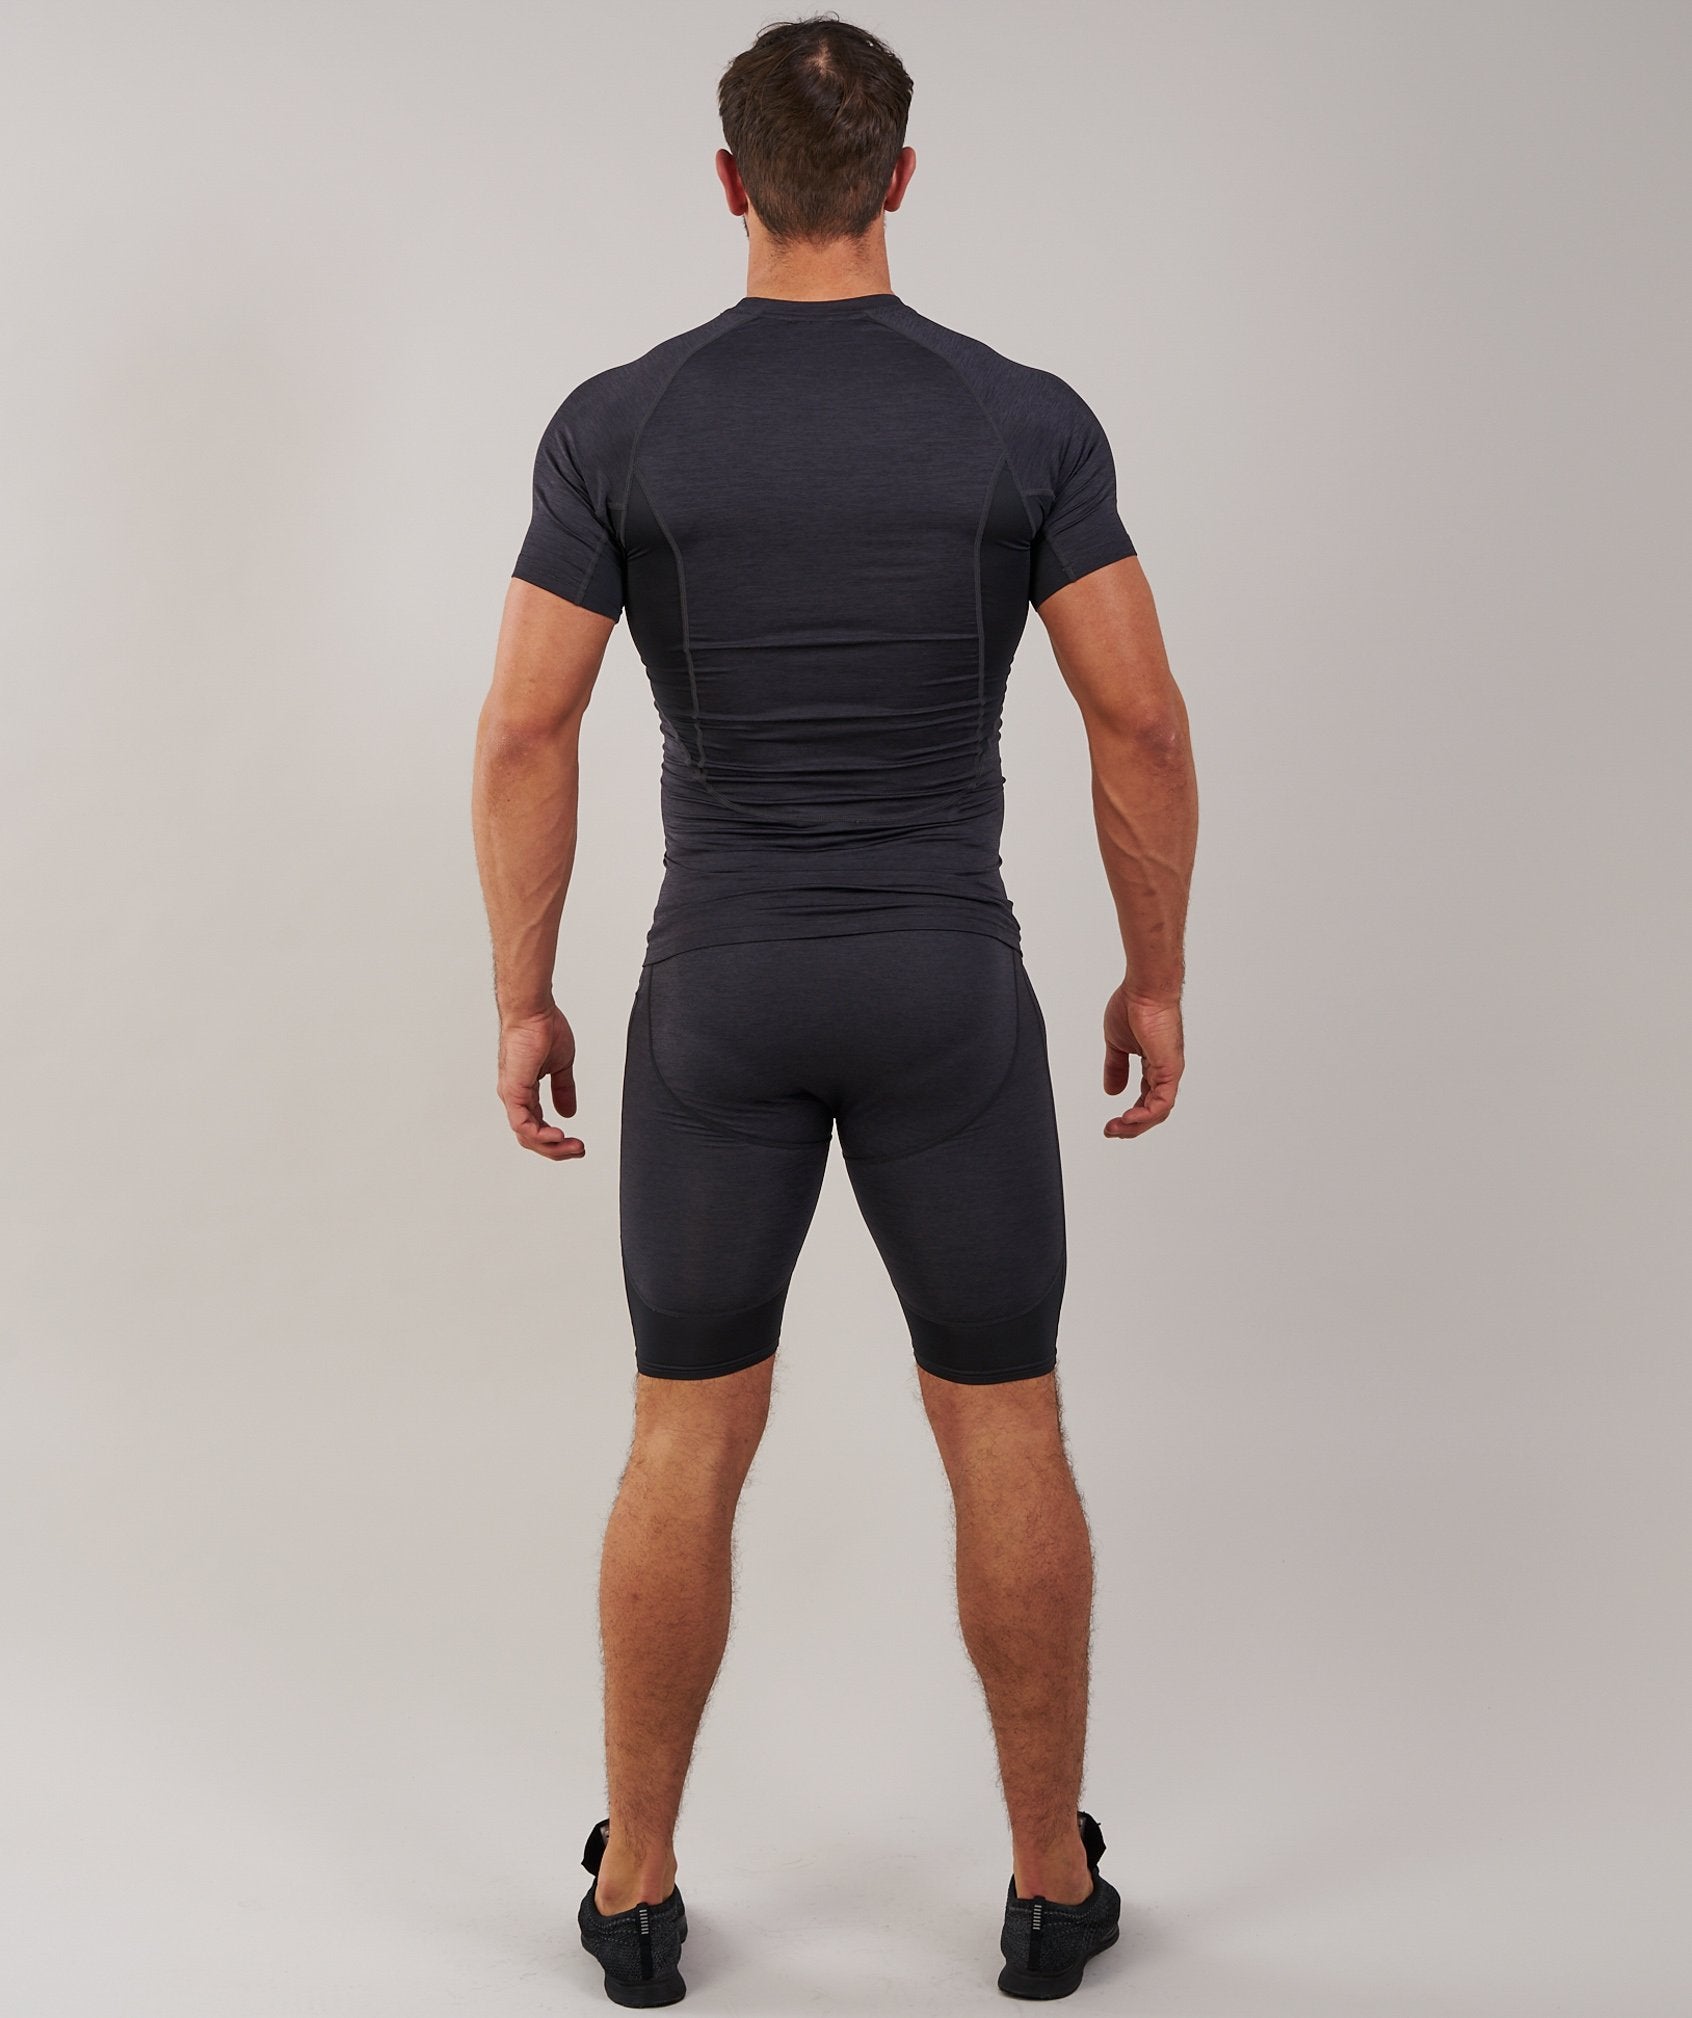 Element Baselayer Shorts in Black Marl - view 2